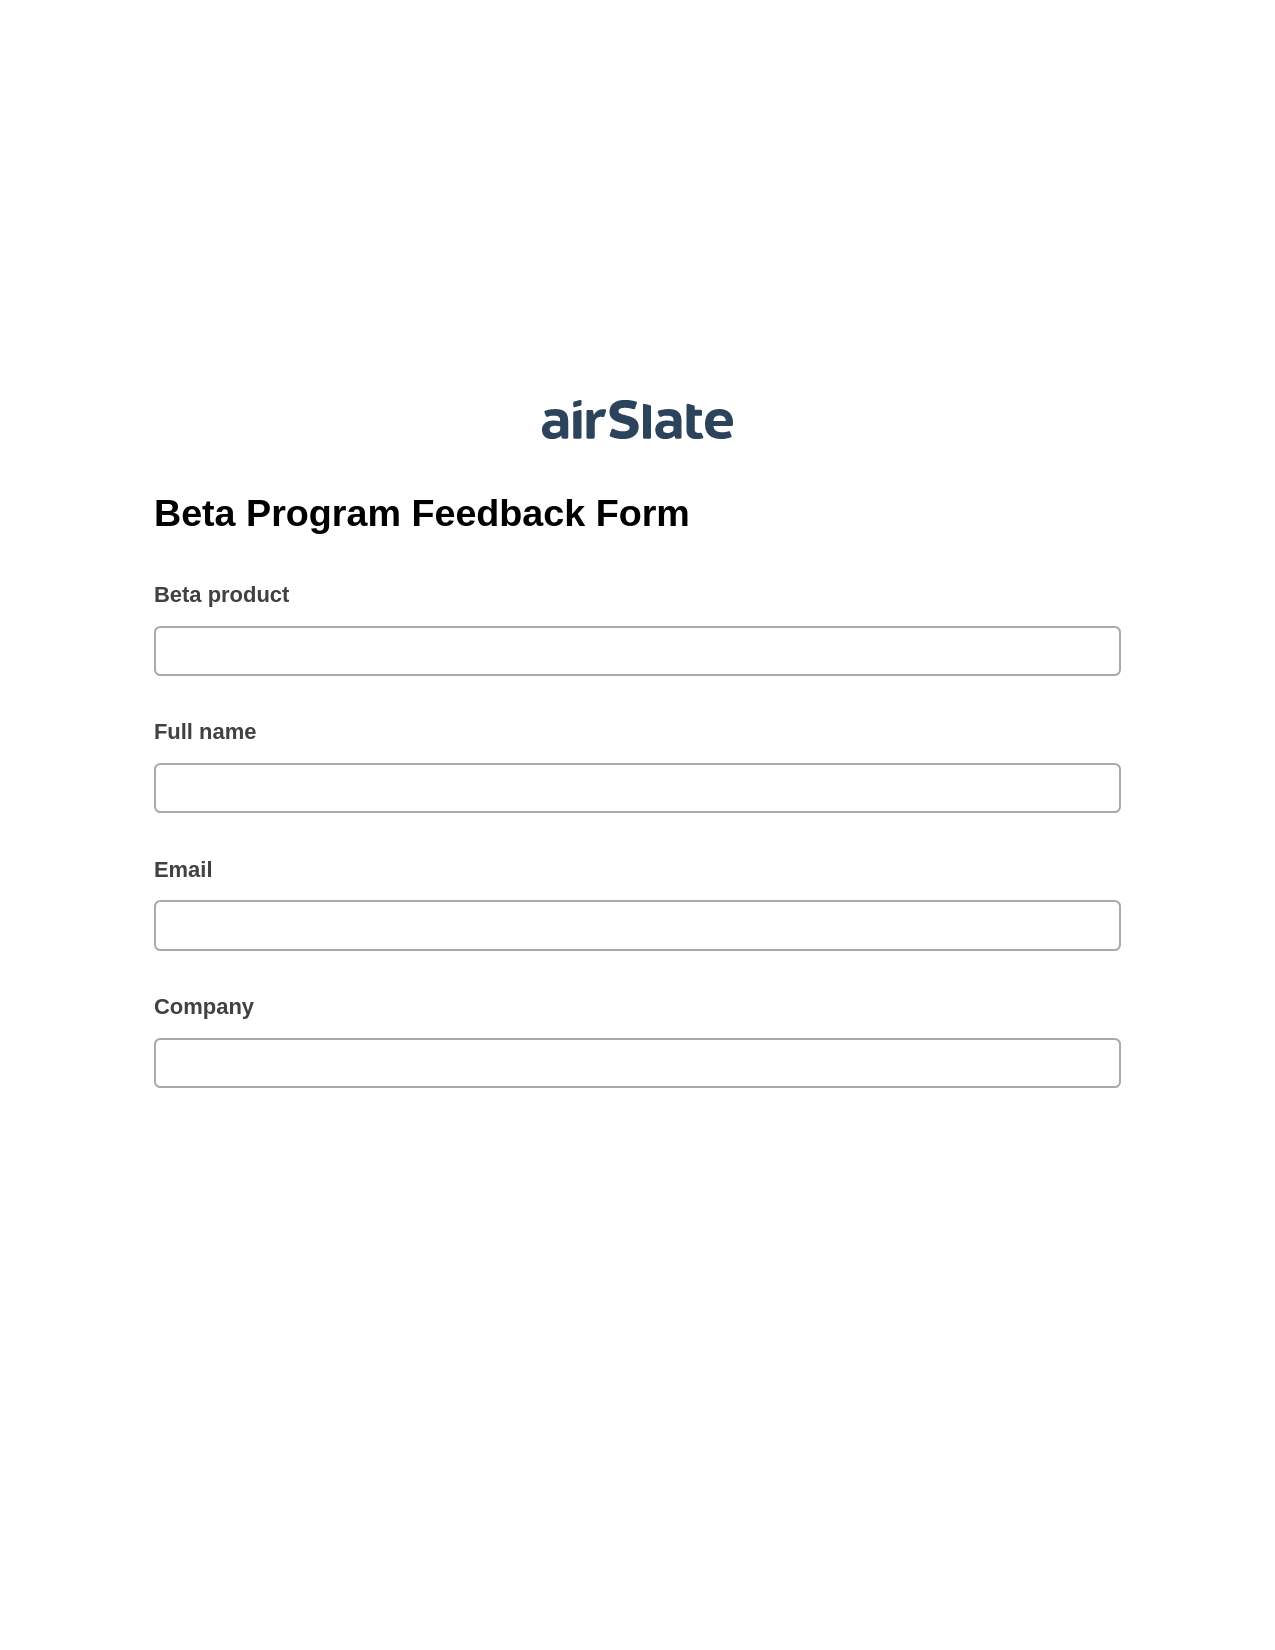 Multirole Beta Program Feedback Form Pre-fill from another Slate Bot, Reminder Bot, Export to Salesforce Bot